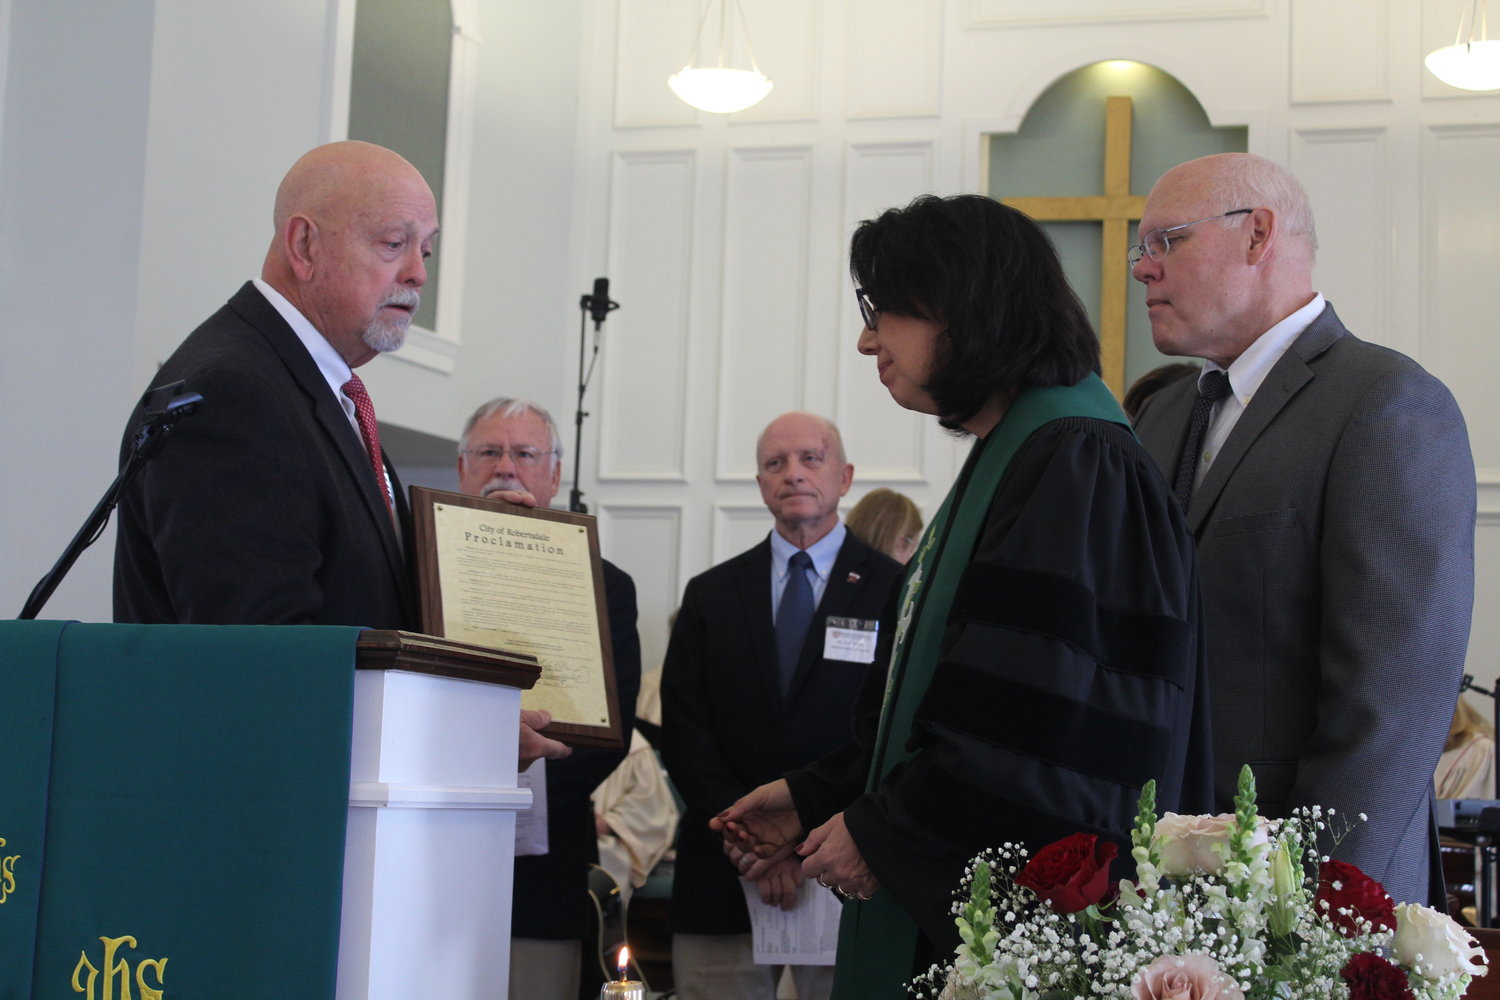 Mayor Charles Murphy presents a proclamation from the city to the Rev. Dr. Christine Cook.